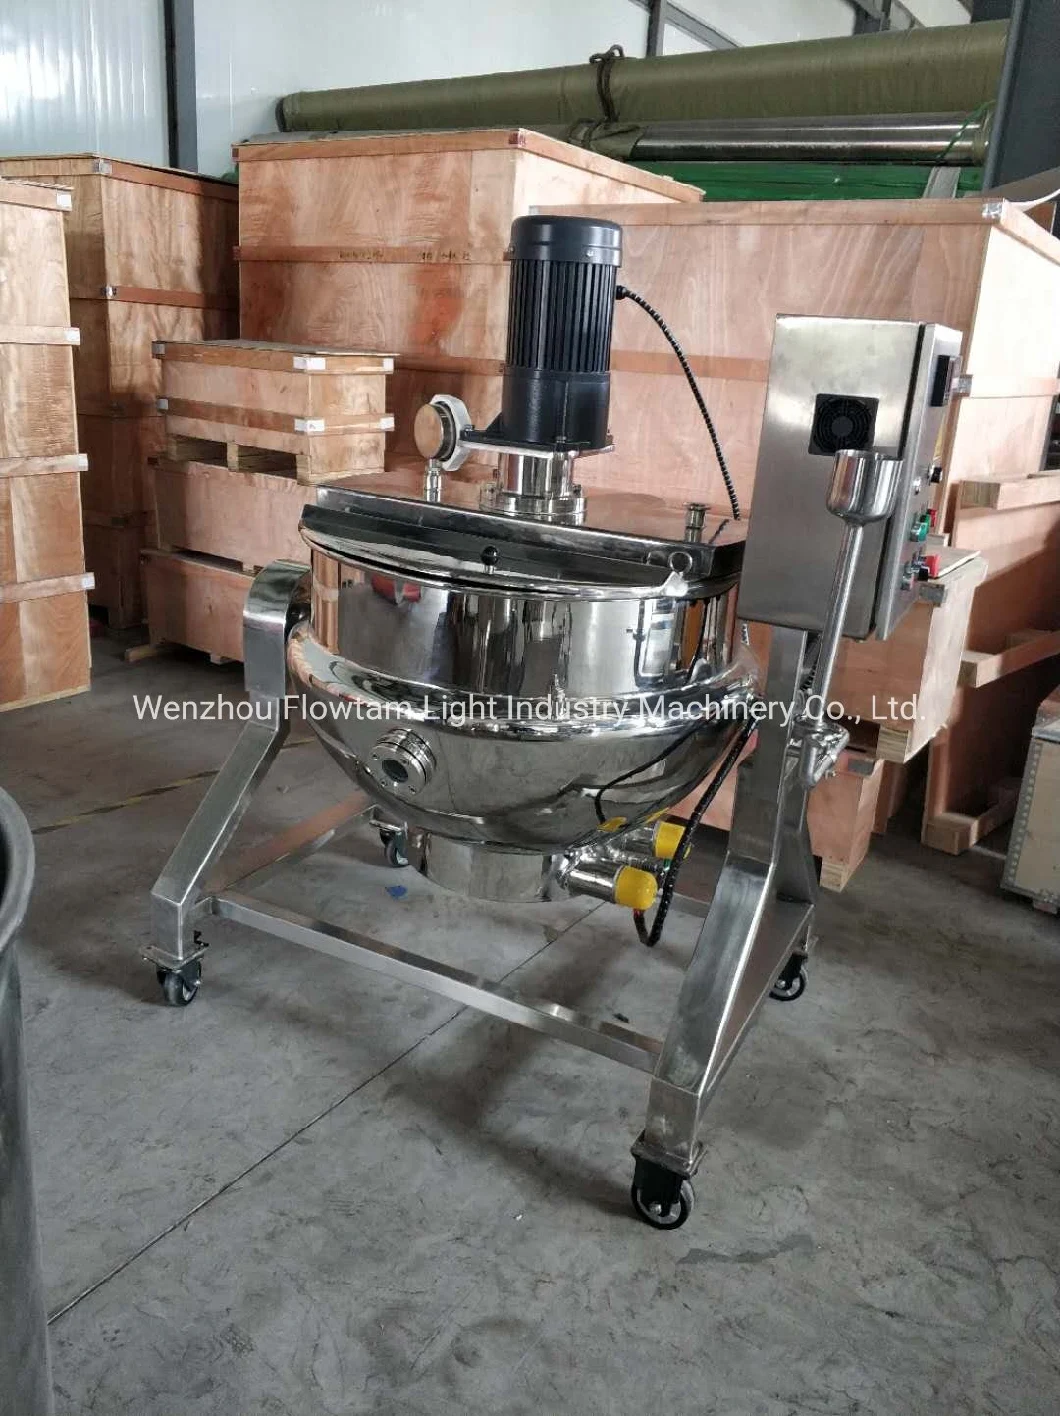 Hygienic Stainless Steel Food Processing Jacket Kettle Caramel Cooking Pot